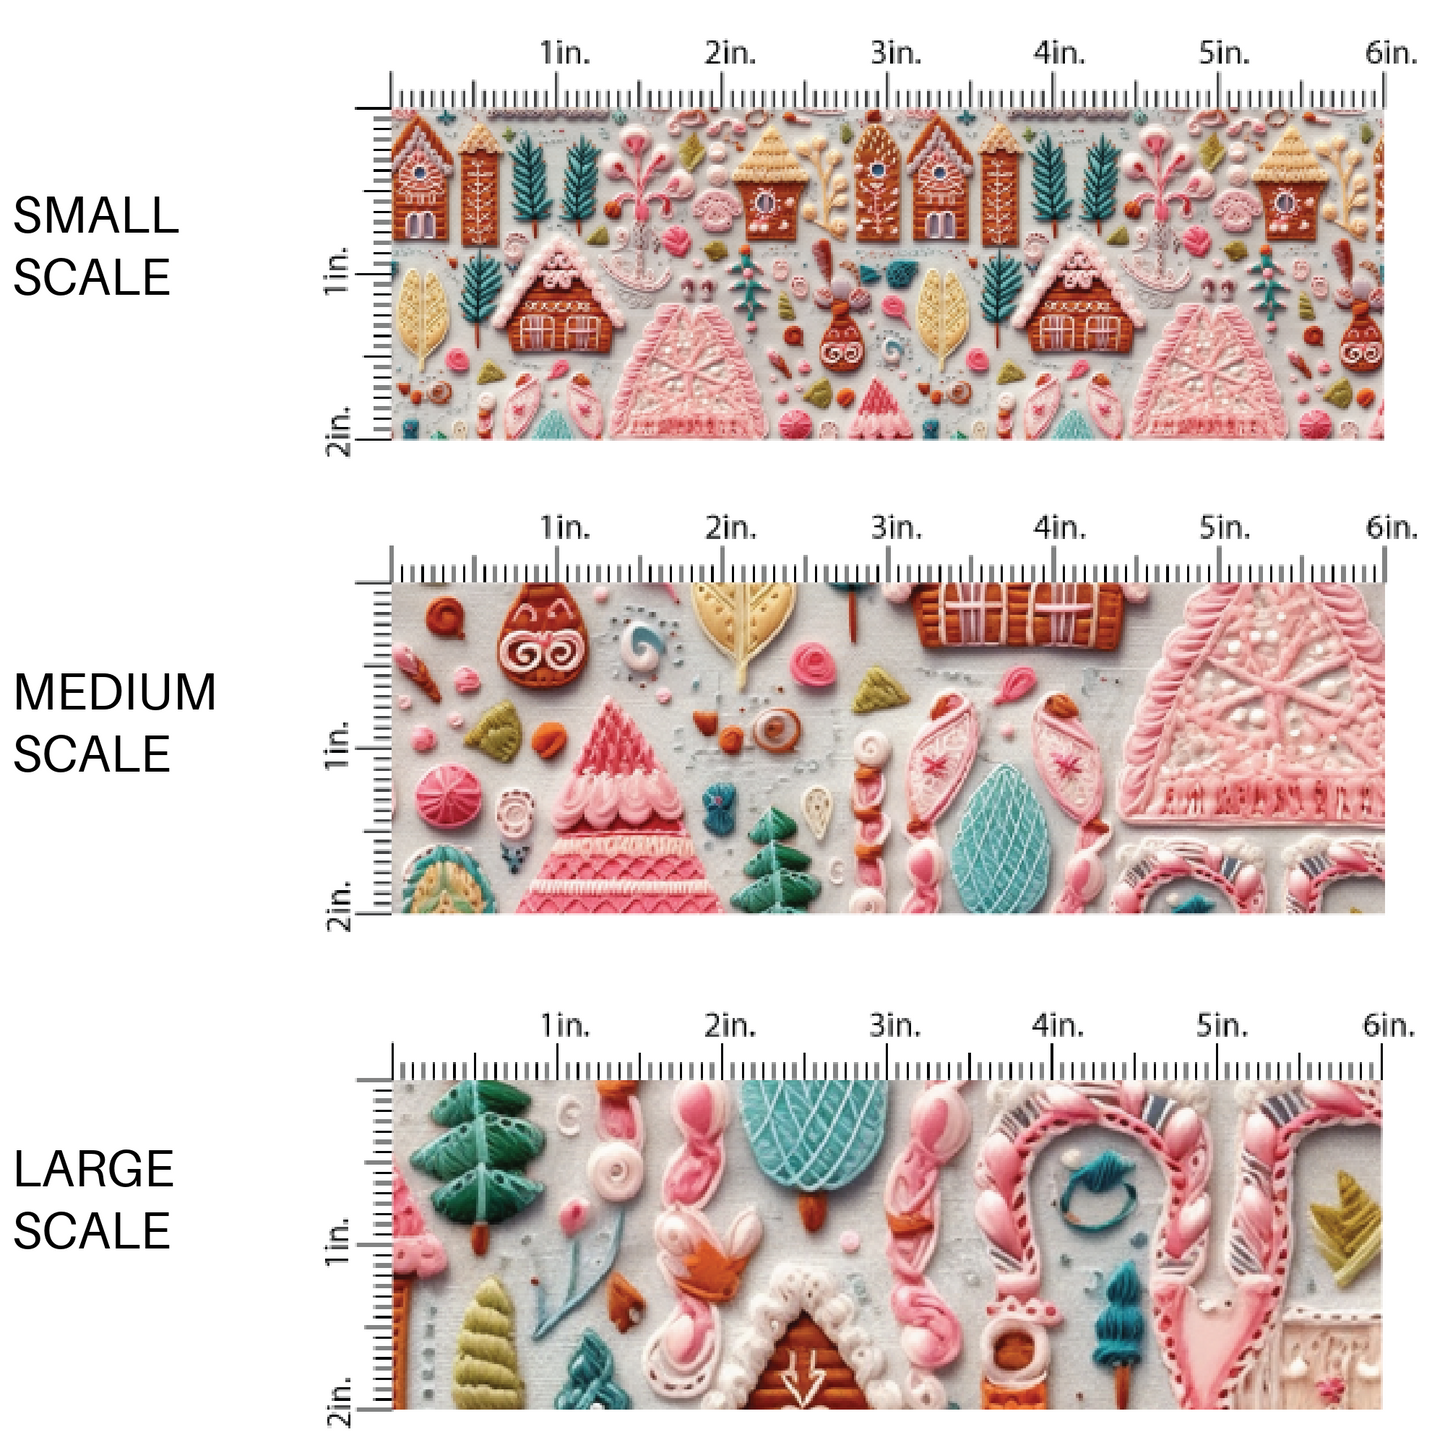 This scale chart of small scale, medium scale, and large scale of these holiday sewn pattern themed fabric by the yard features Christmas village cabins and trees. This fun Christmas fabric can be used for all your sewing and crafting needs!